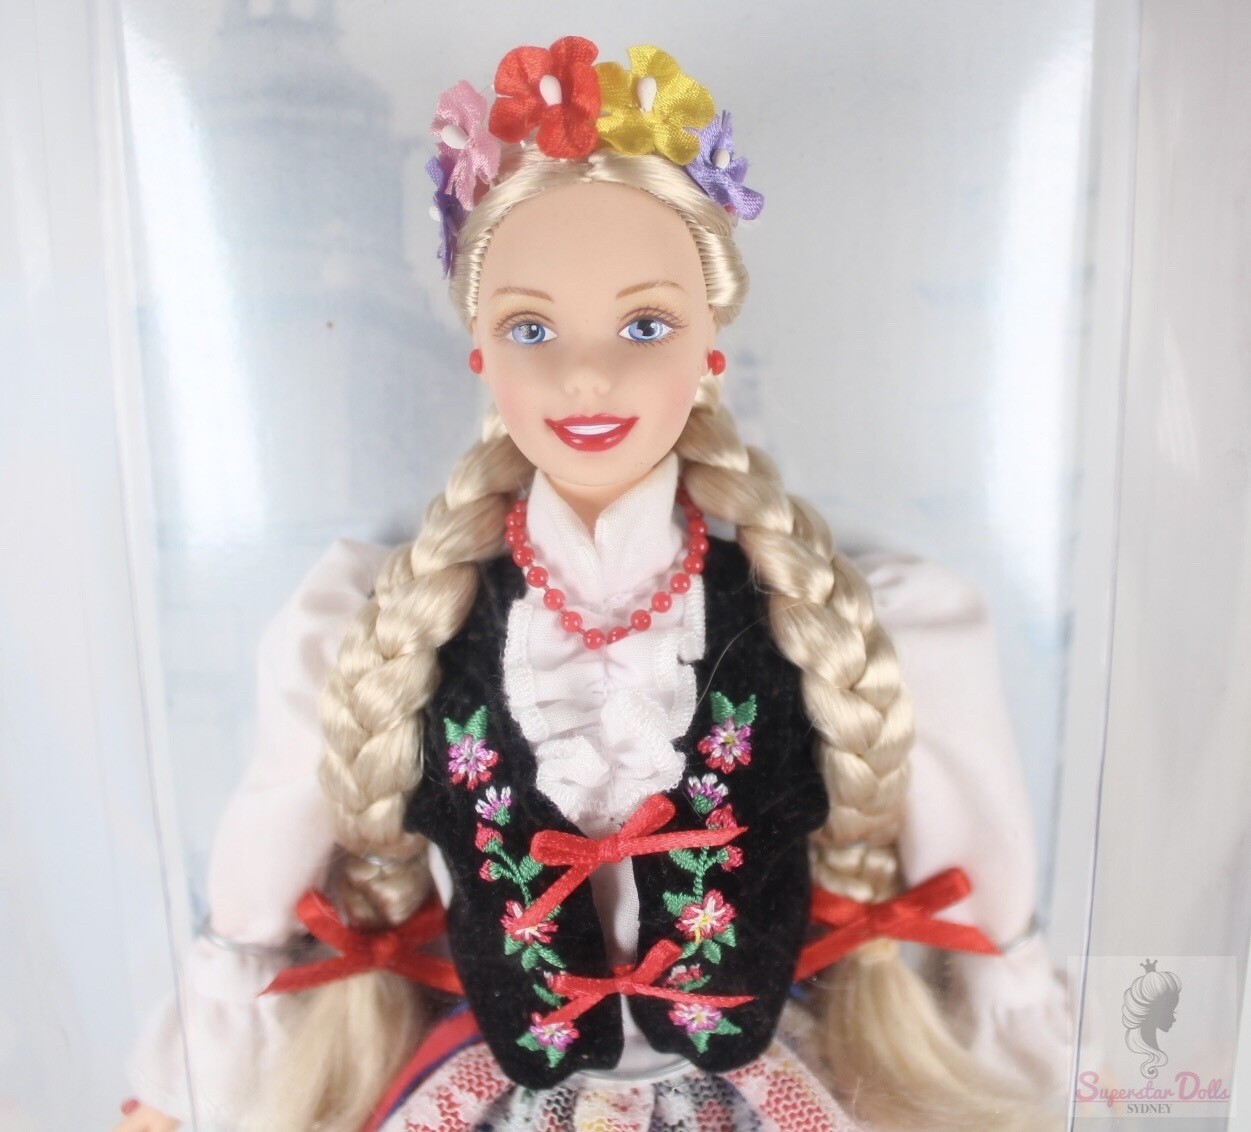 1997 Collector Edition: Polish Barbie Doll from the Dolls of the World Collection